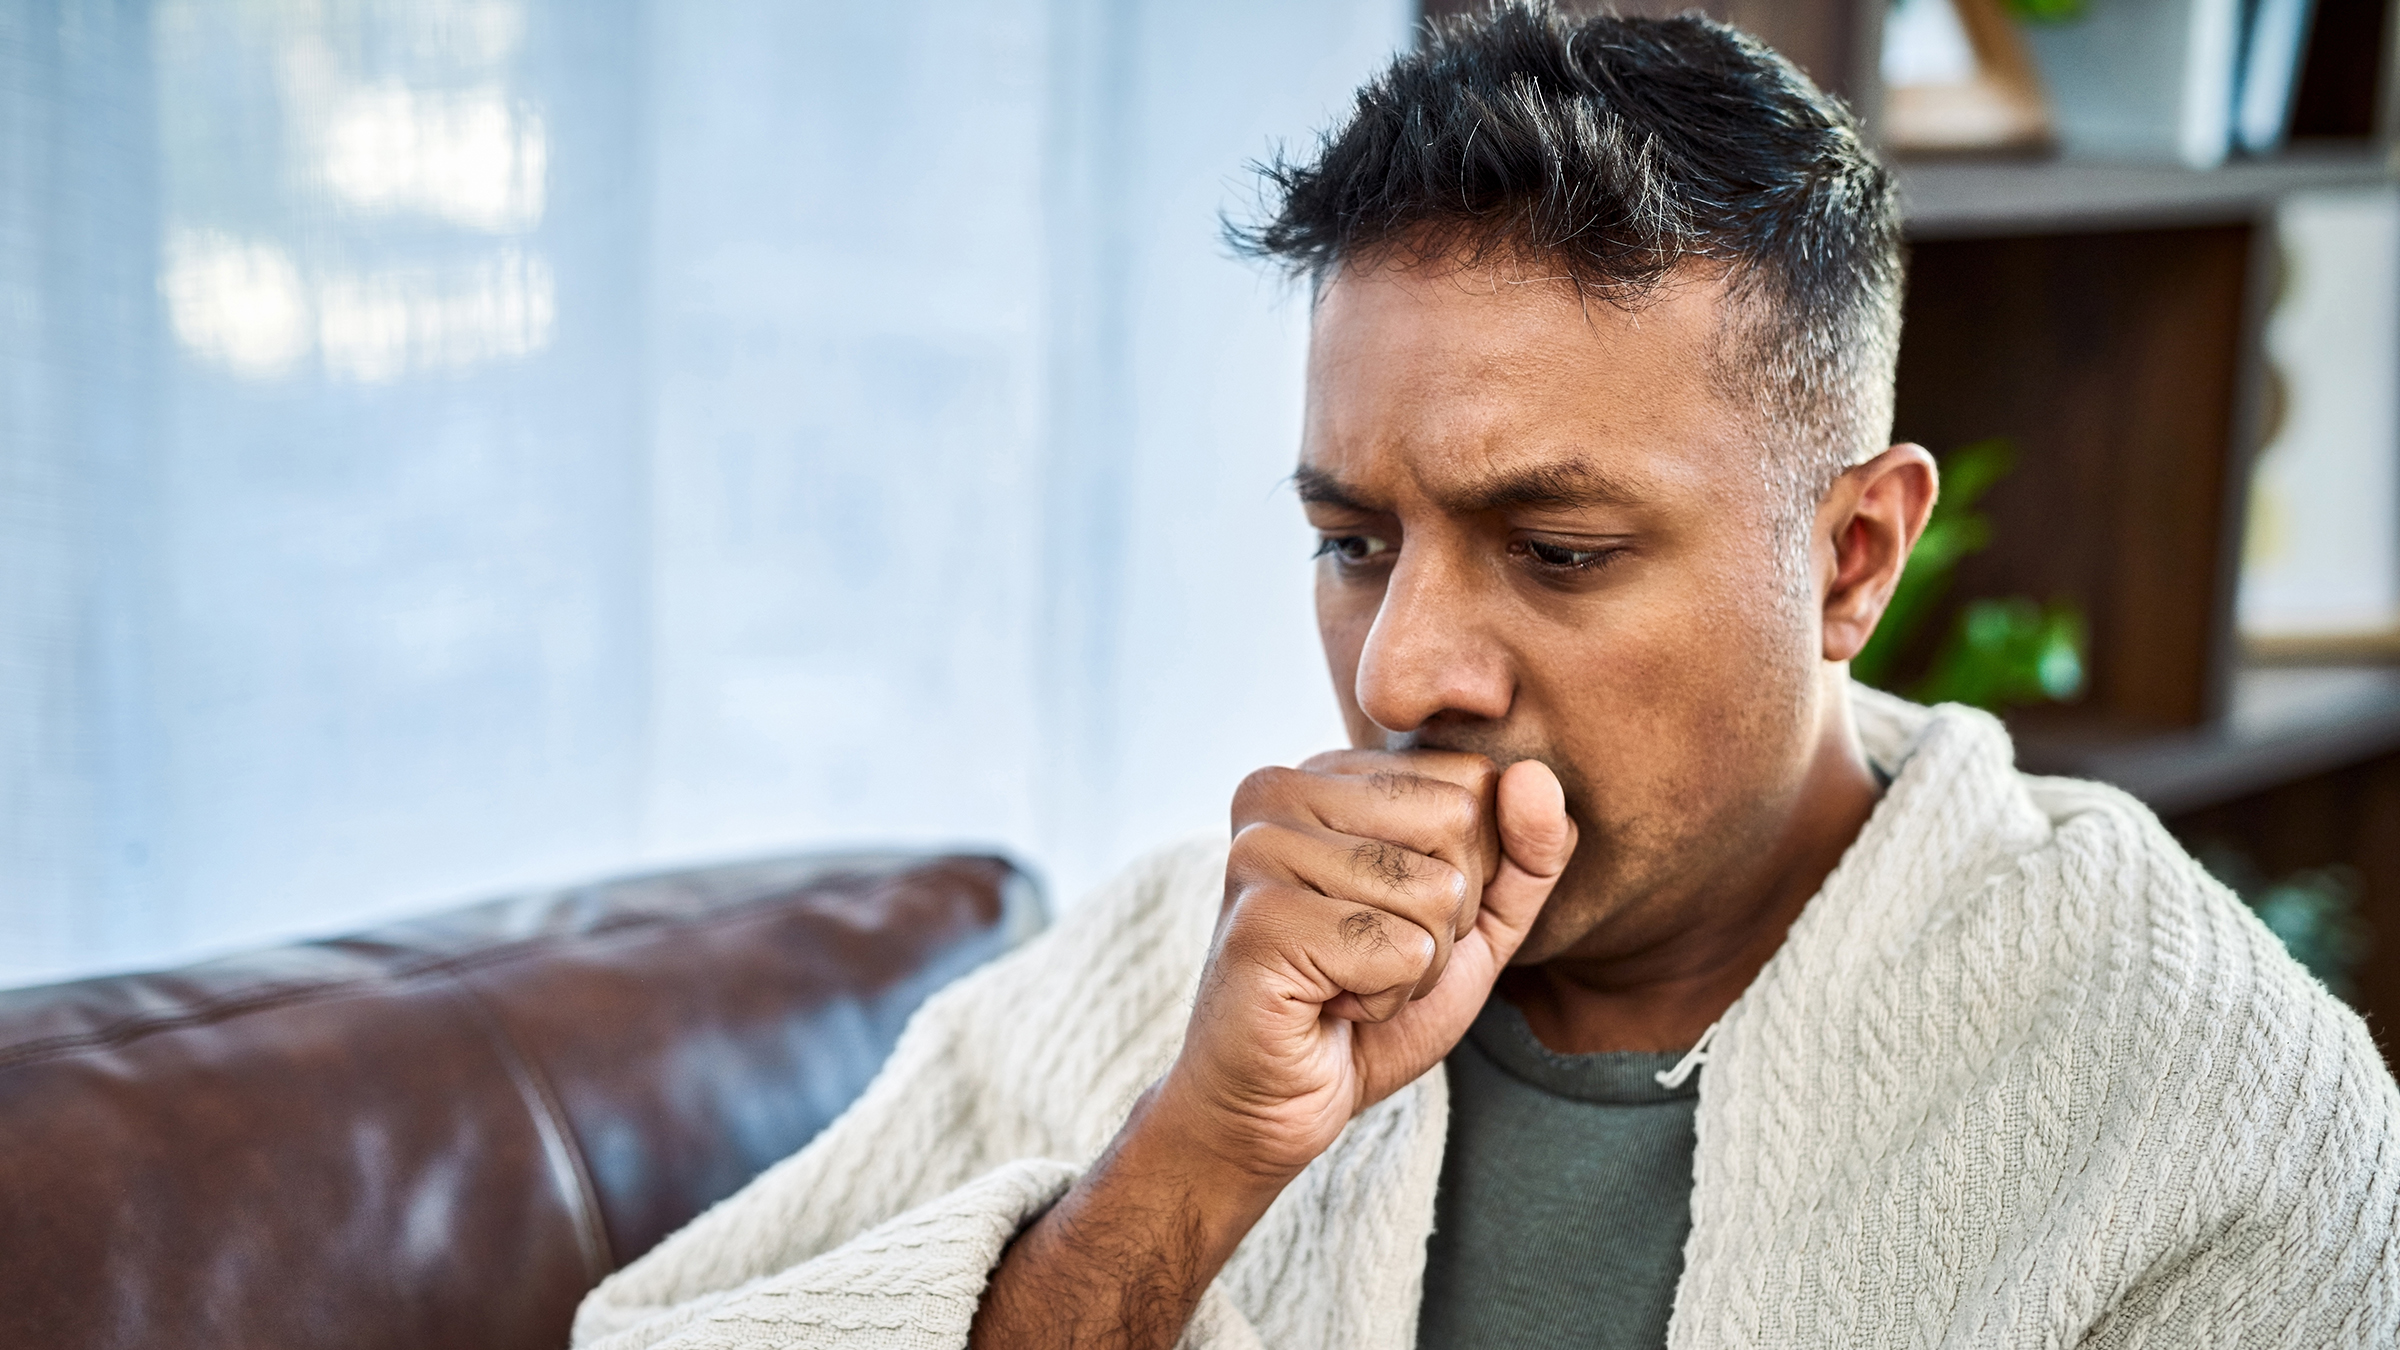 Nagging Cough or Hoarseness